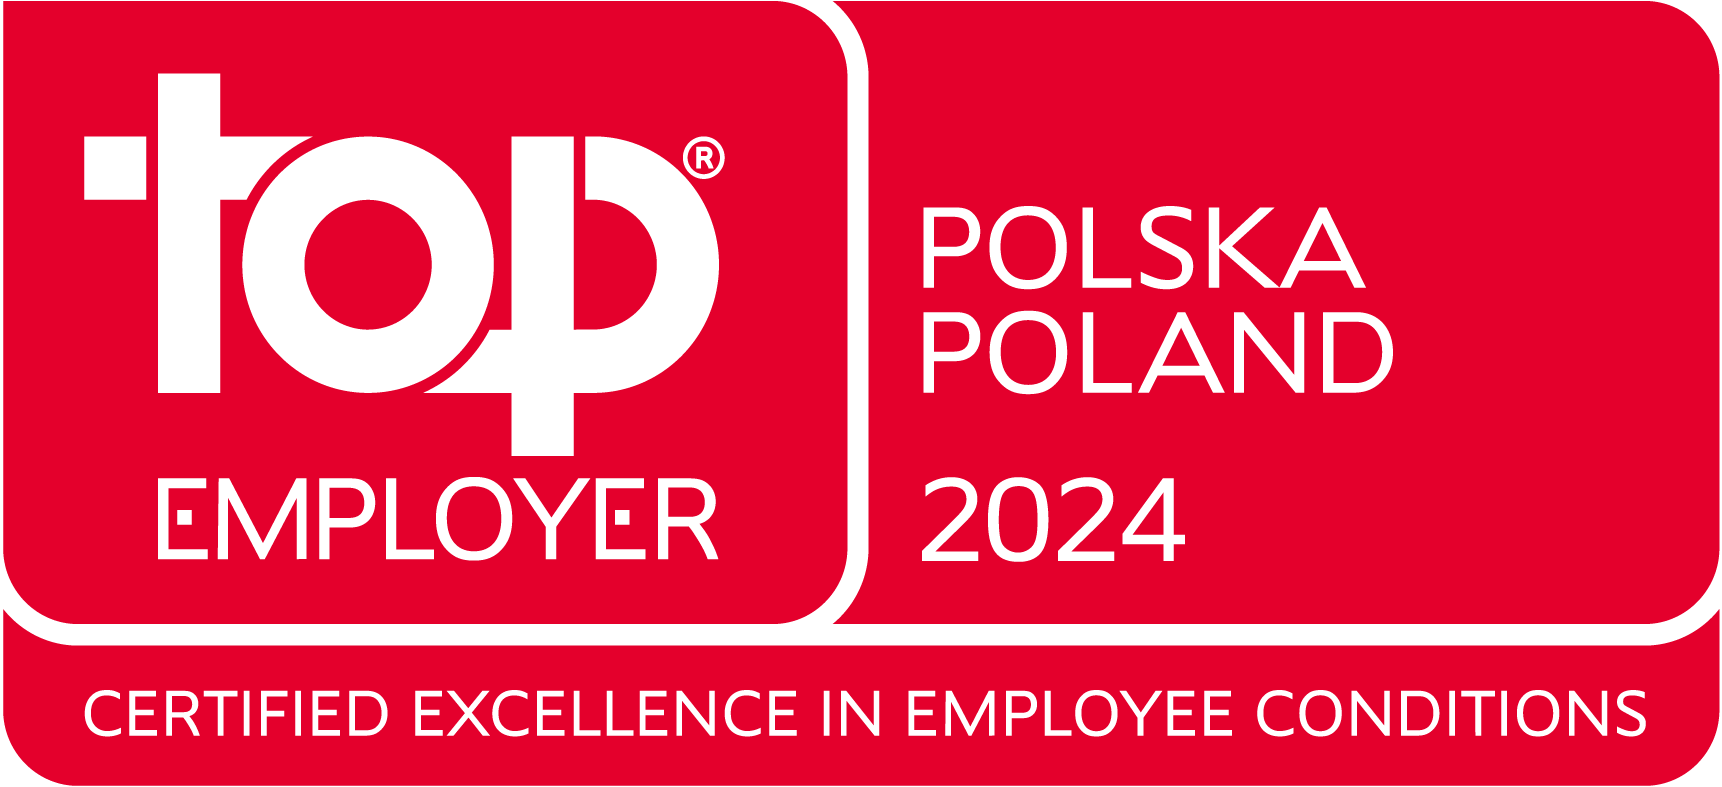 Top Employer Poland, Polska 2023. Certified Excellence in Employee Conditions.